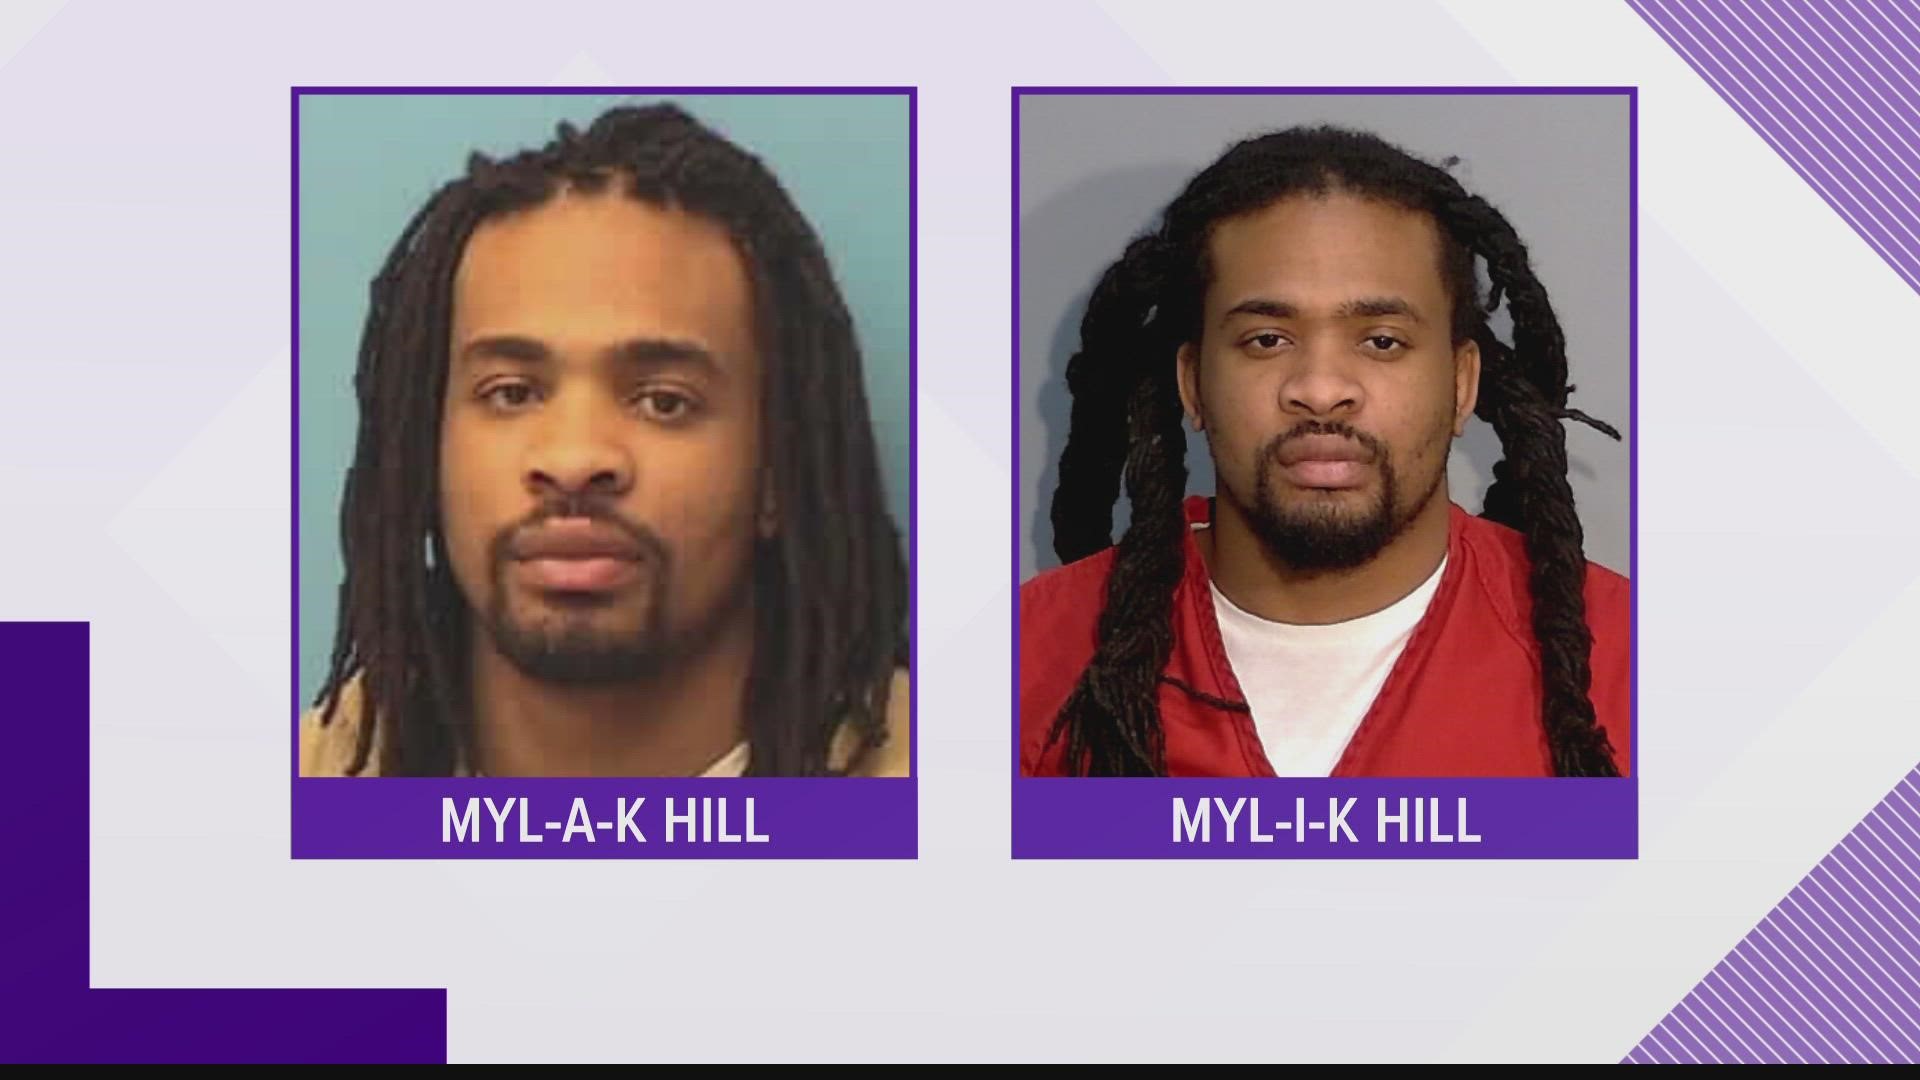 It turns out Mylik Hill was likely free at the time of the shooting because of one letter in his first name.